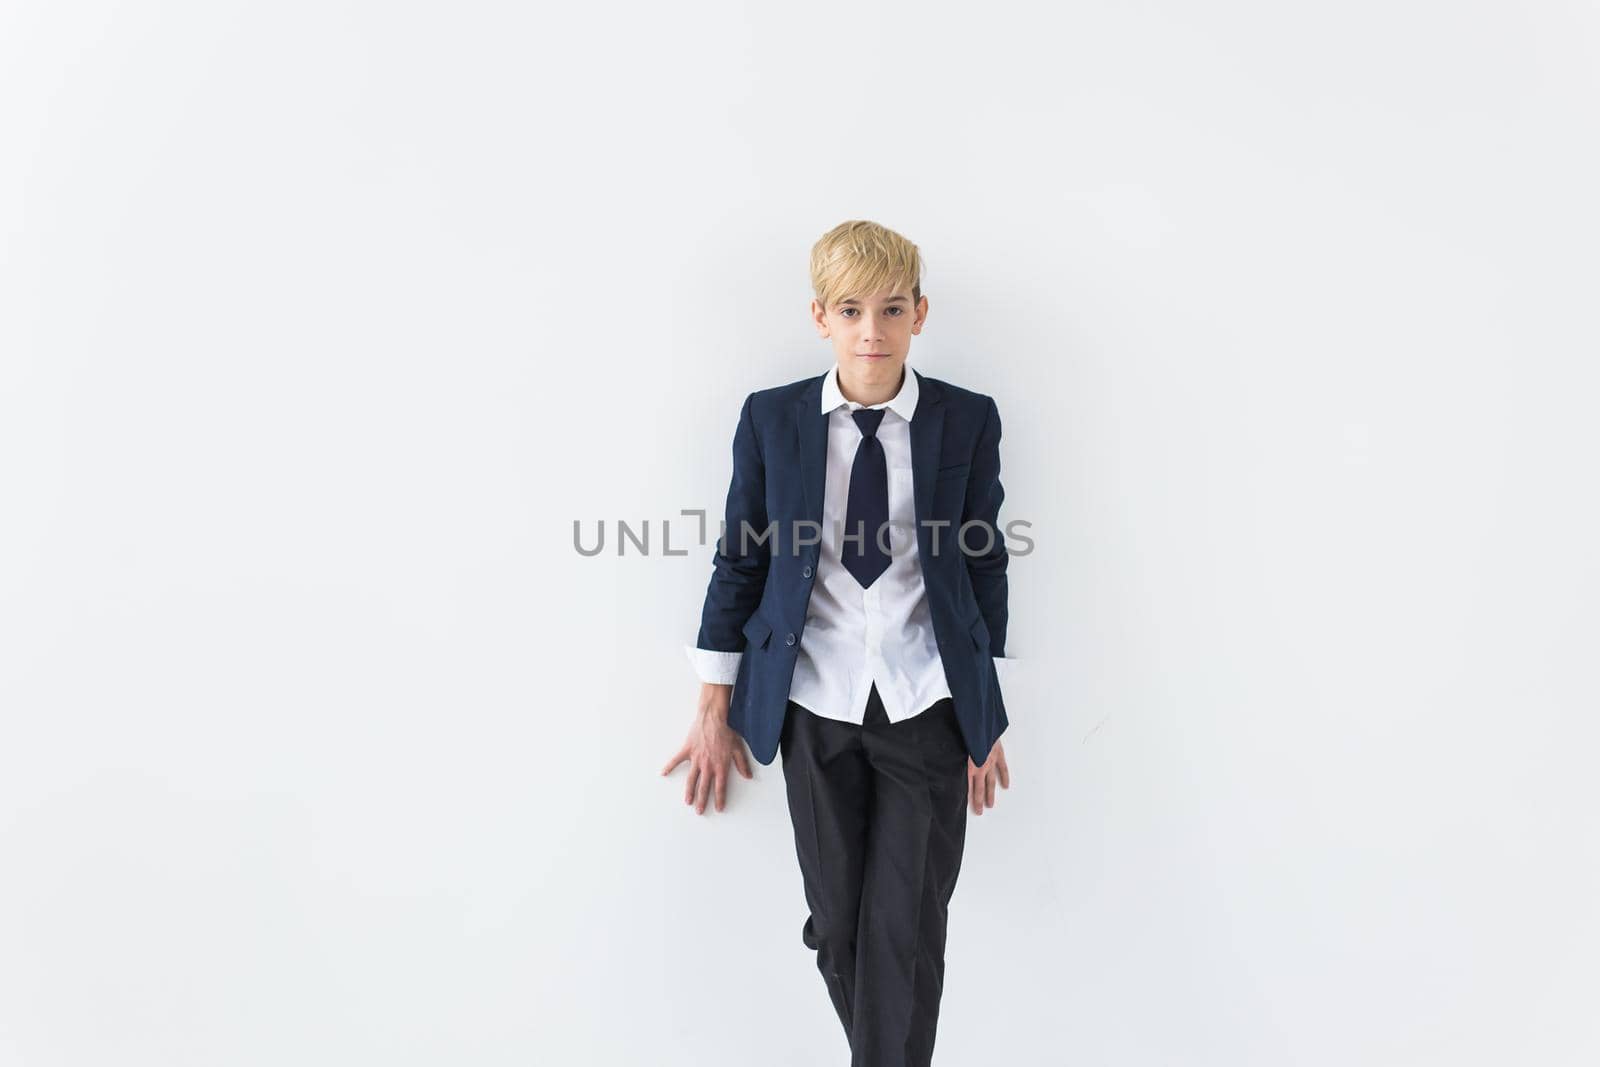 Puberty concept - Teenage boy portrait on a white background with copyspace. by Satura86